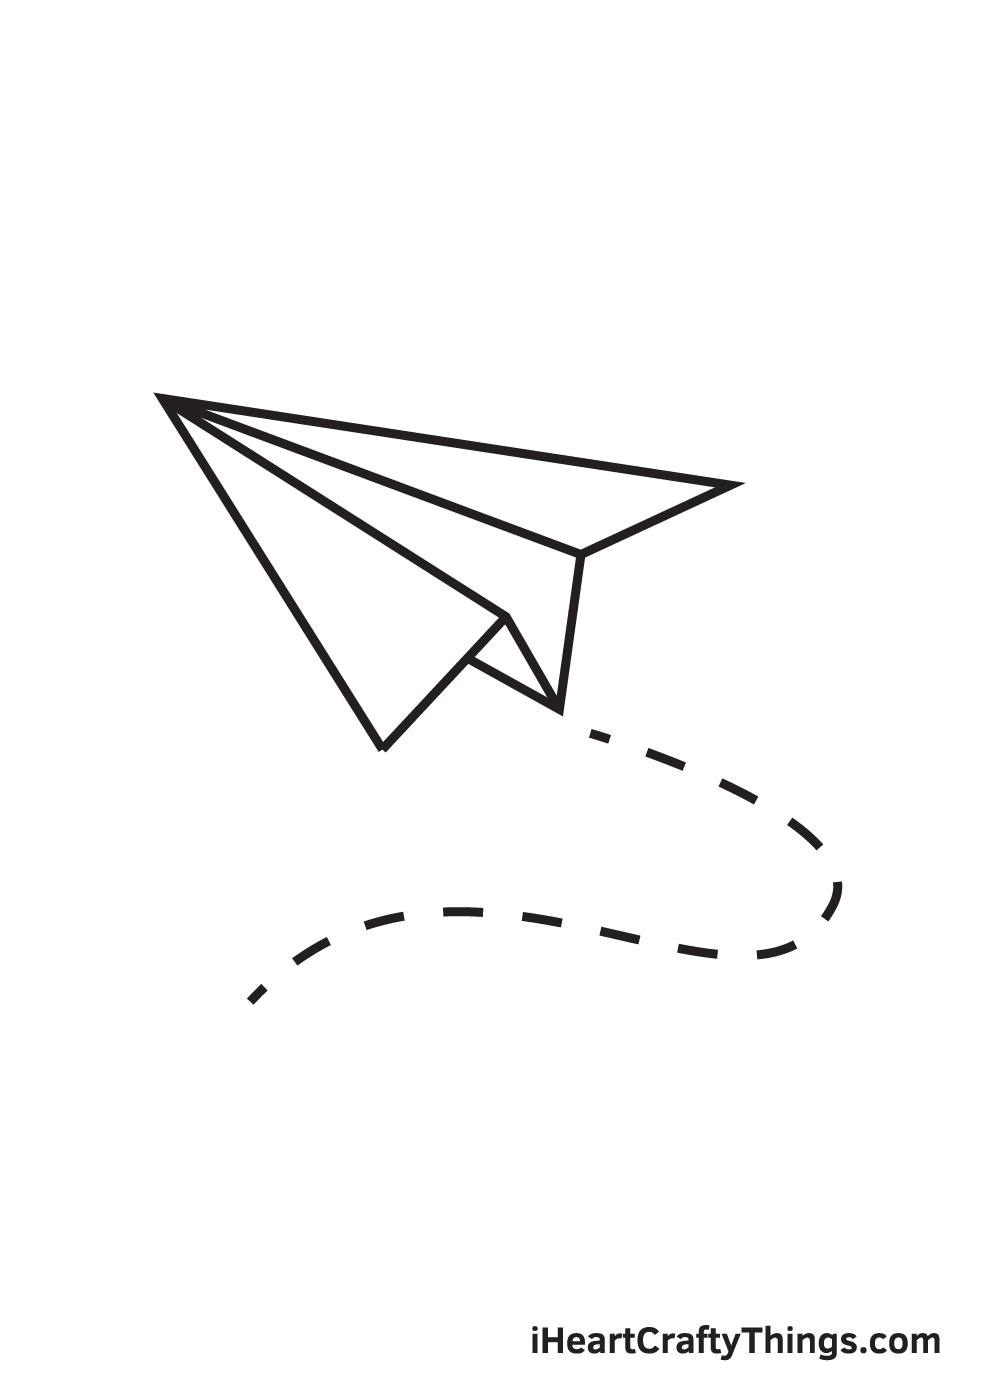 Paper Airplane Drawing - How To Draw A Paper Airplane Step By Step